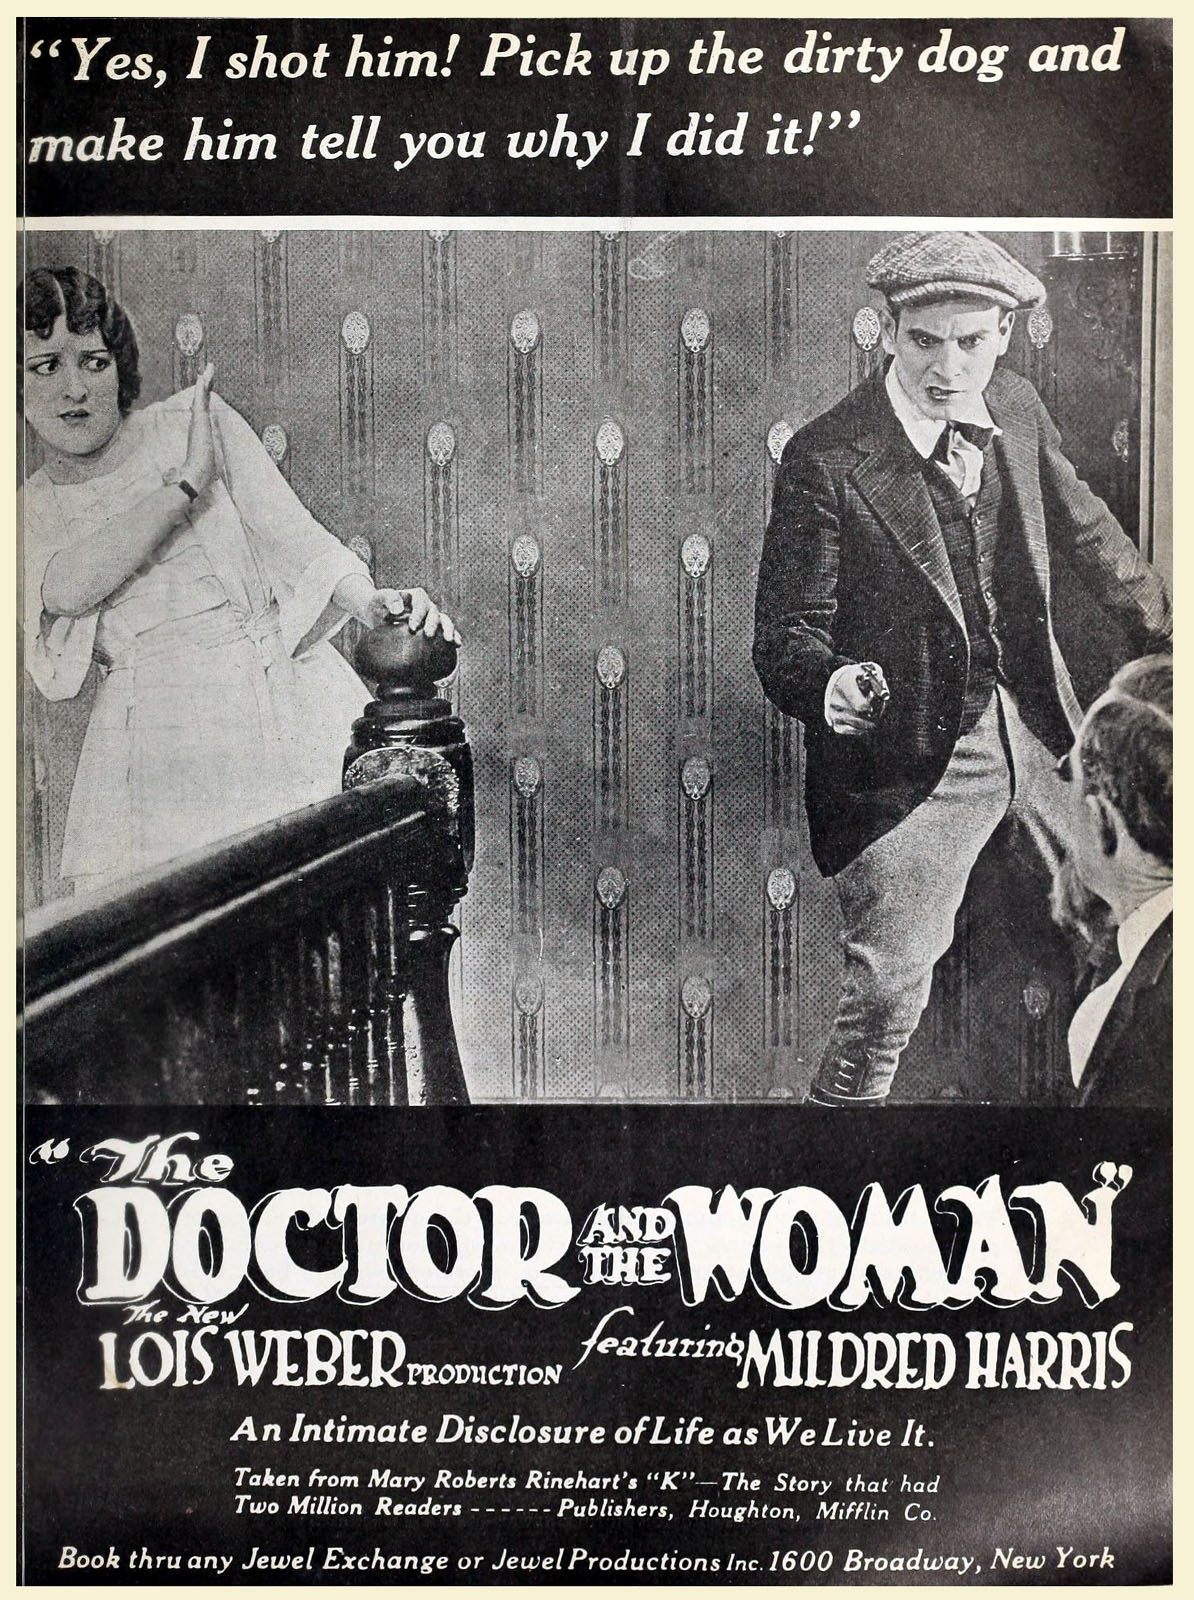 DOCTOR AND THE WOMAN, THE